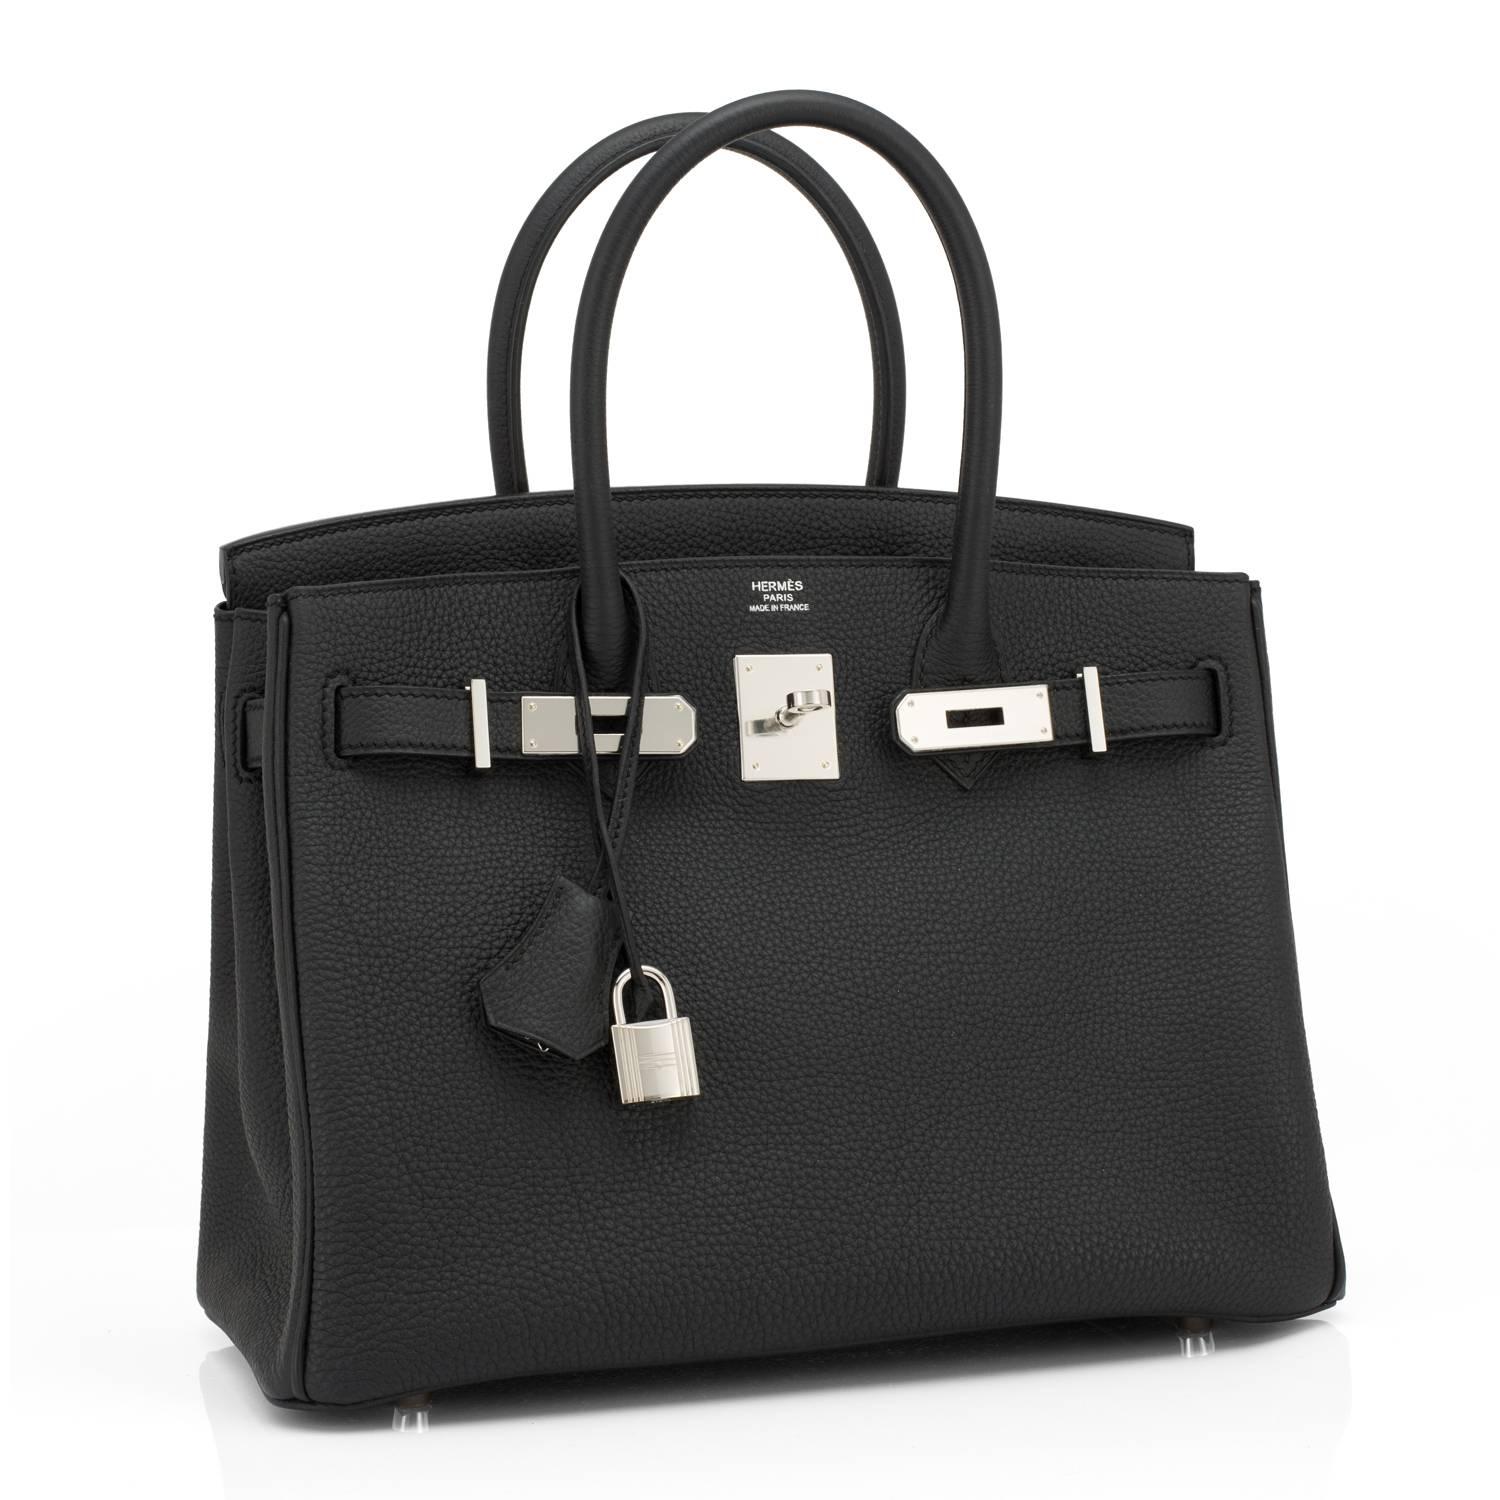 Hermes Black Togo 30cm Birkin Palladium Hardware Leather Bag 
Brand New in Box. Store fresh. Pristine condition (with plastic on hardware)
Just purchased from Hermes store; bag bears interior X stamp.
Comes with keys, lock, clochette, a sleeper for